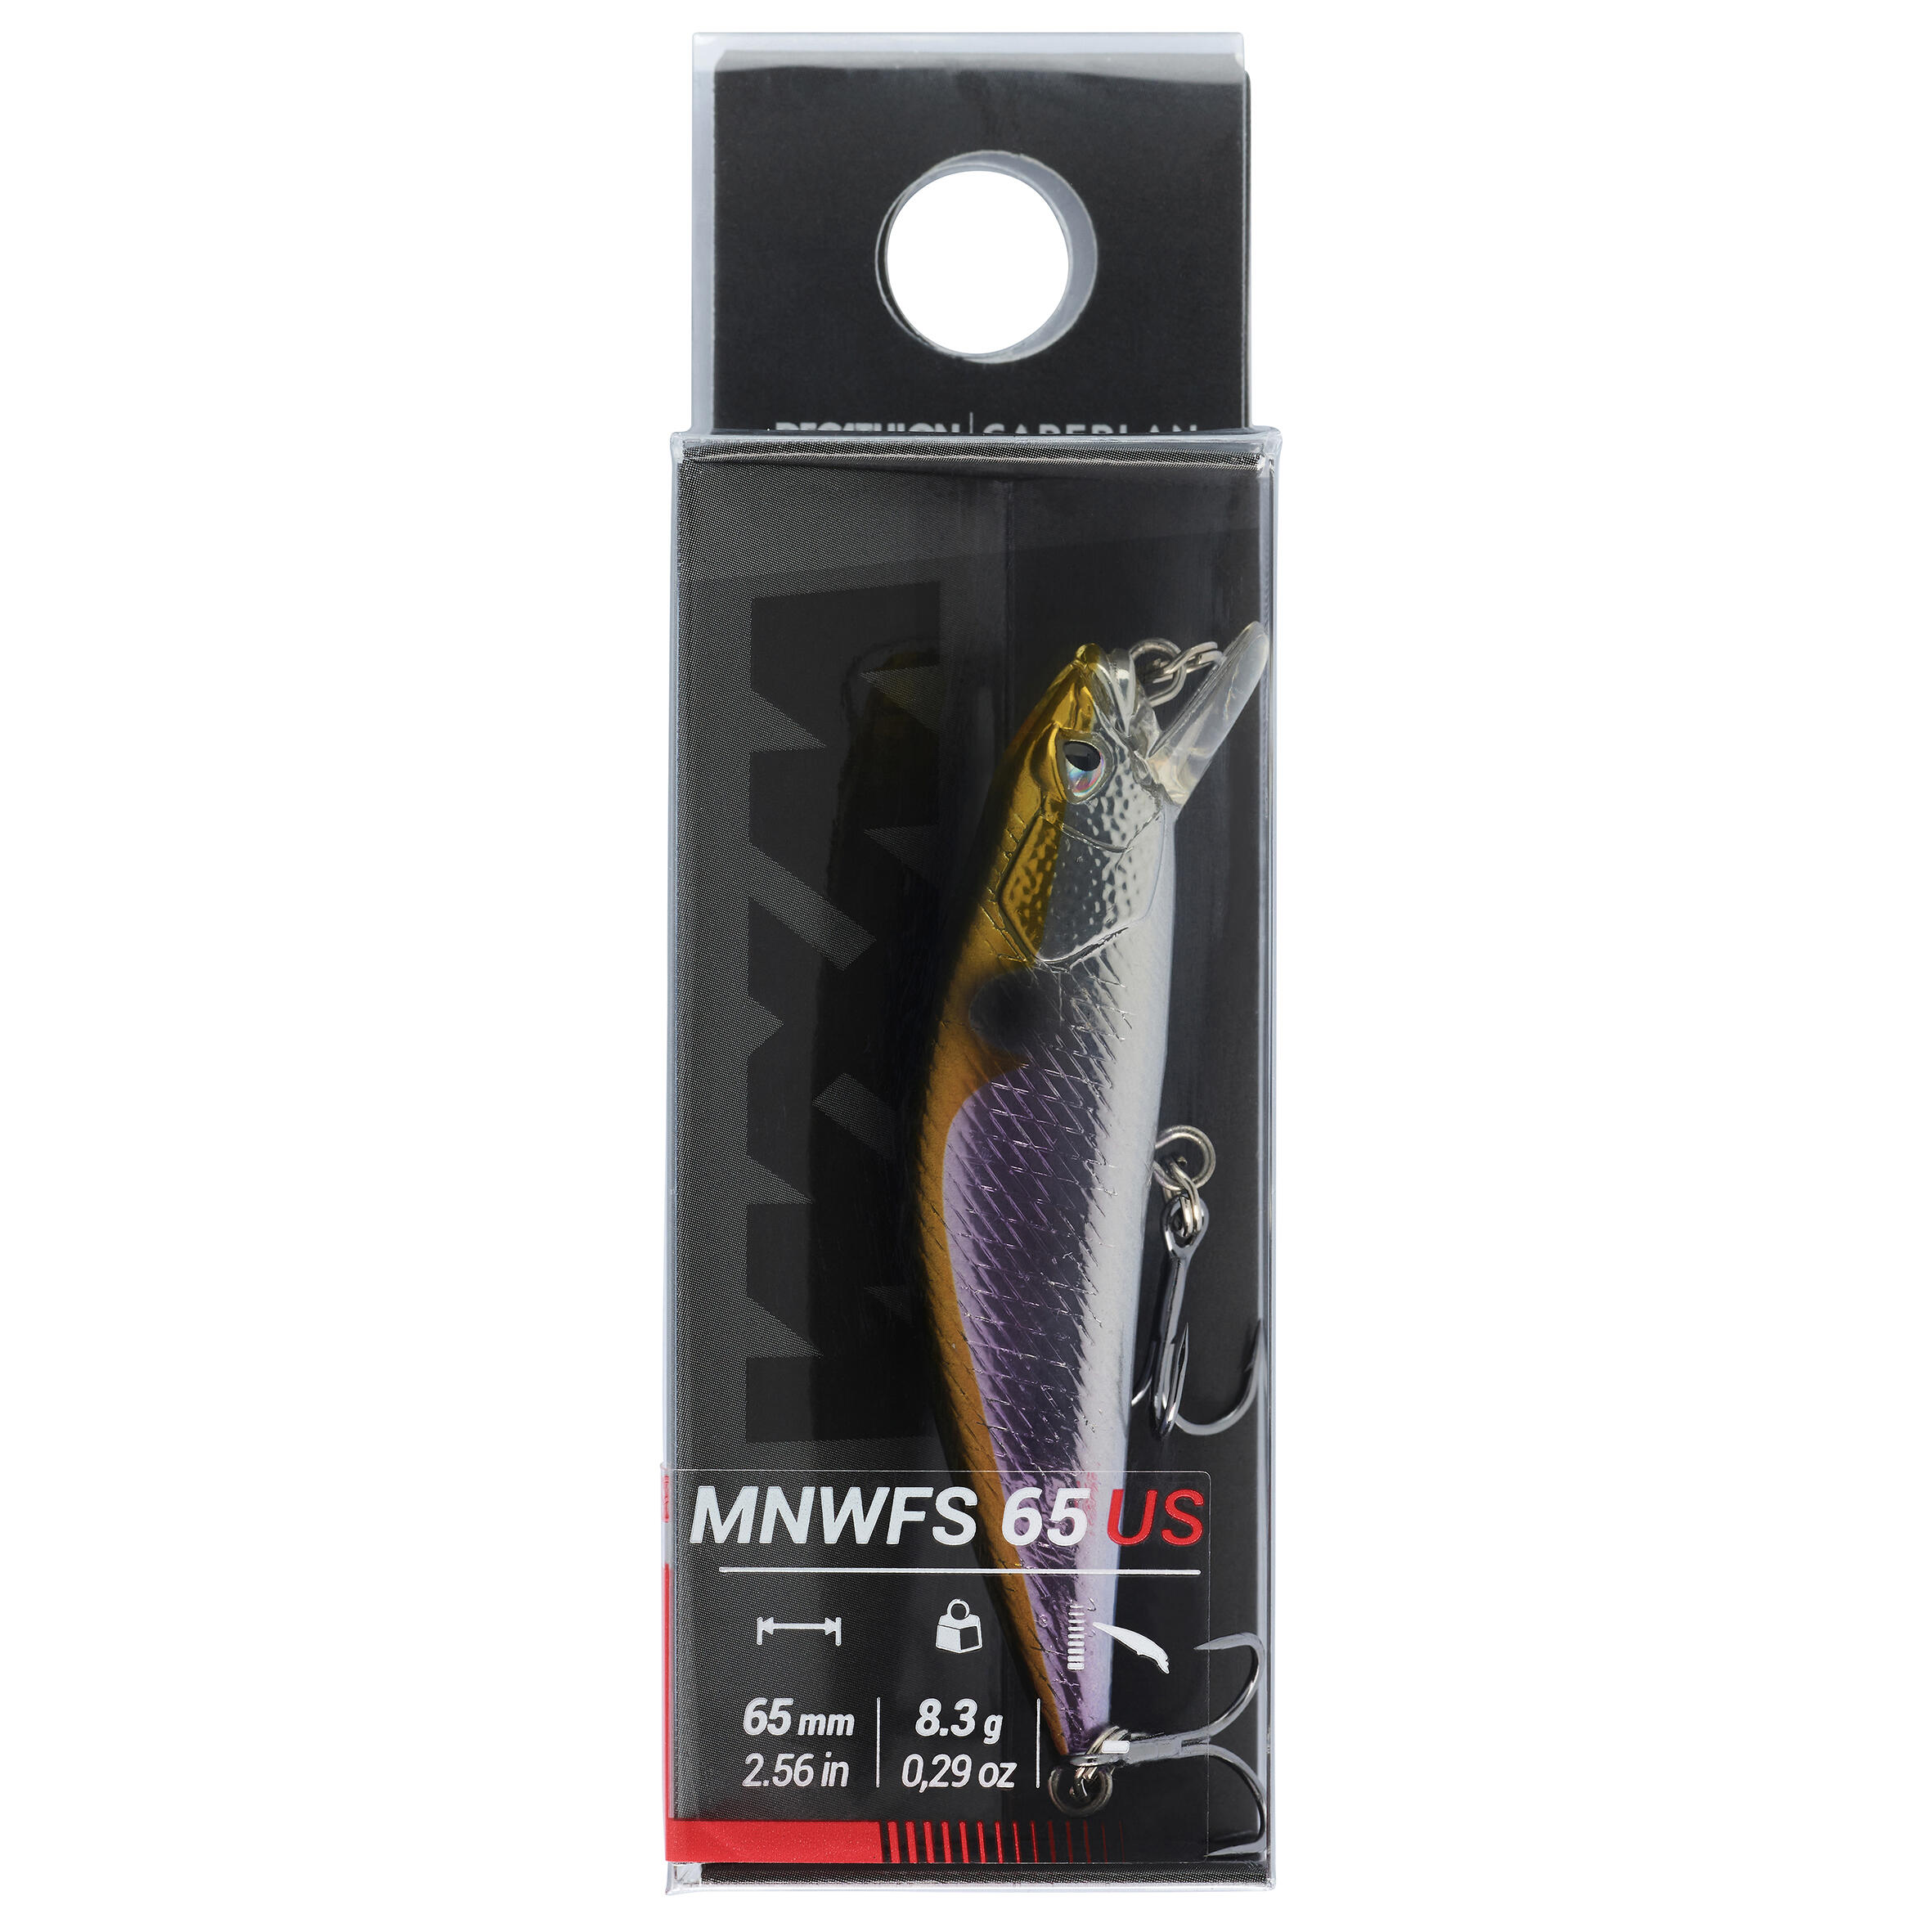 MINNOW HARD LURE FOR TROUT WXM  MNWFS US 65 FRY 4/4